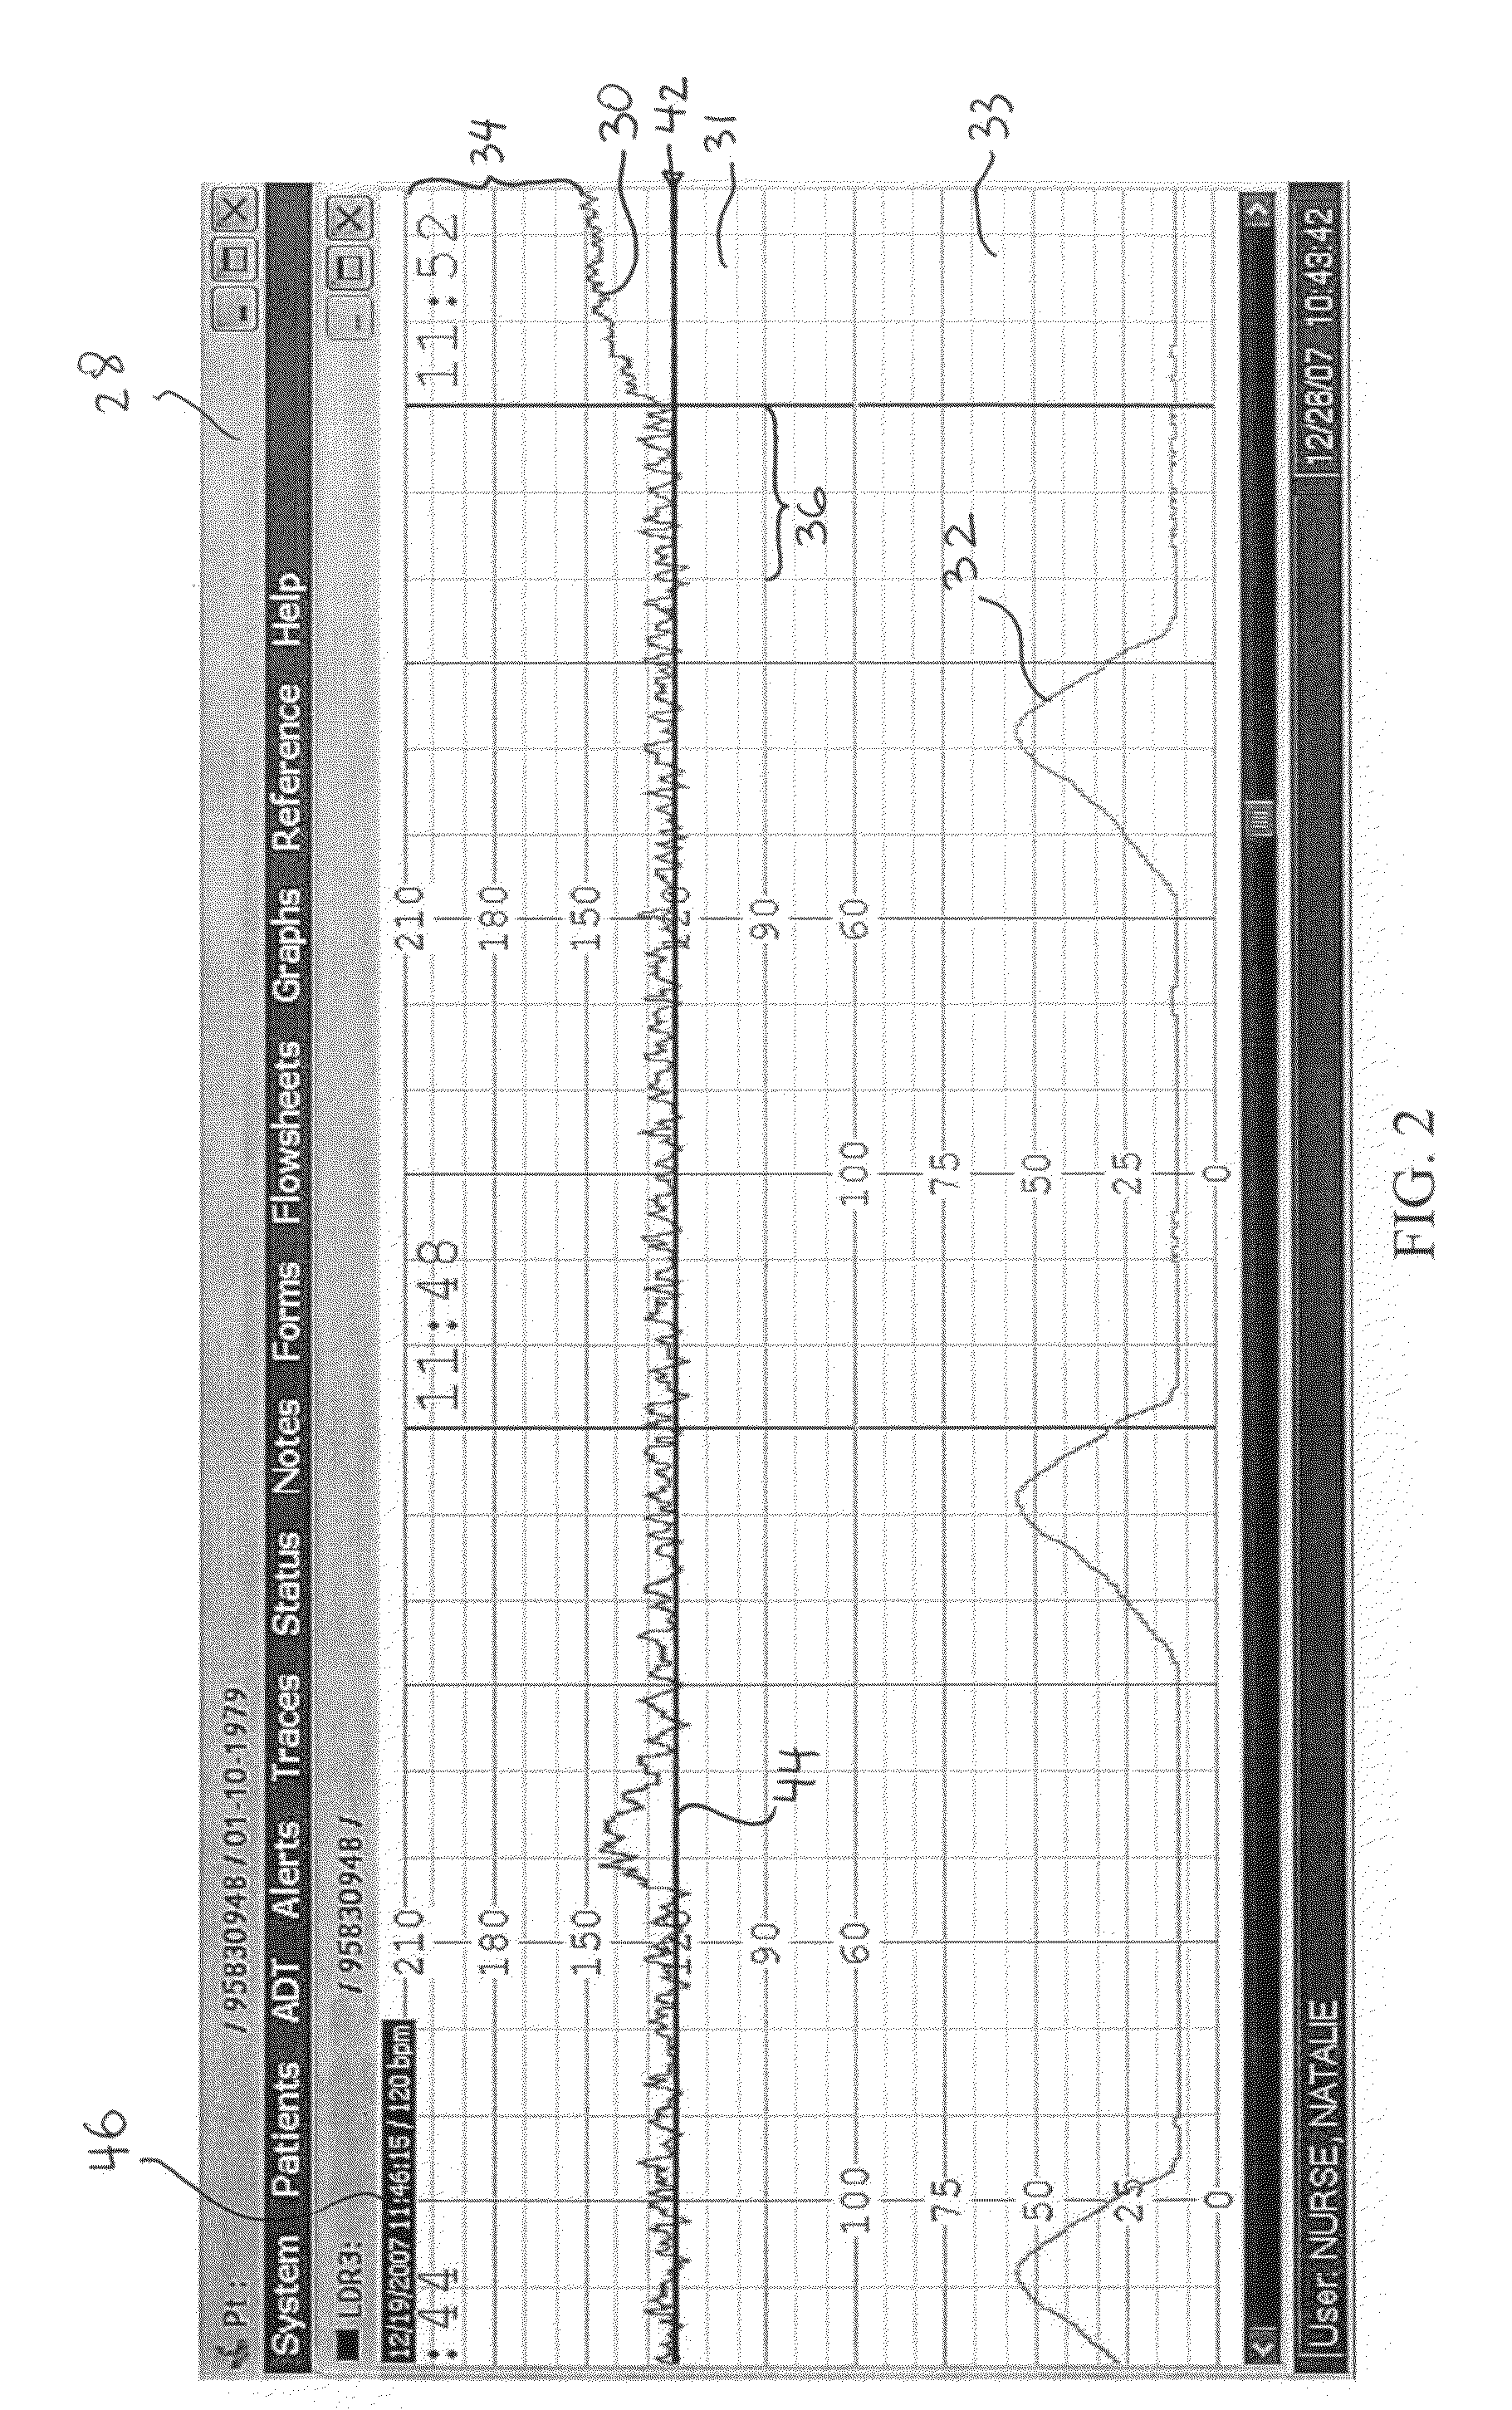 Electronic fetal monitoring assessment system and method